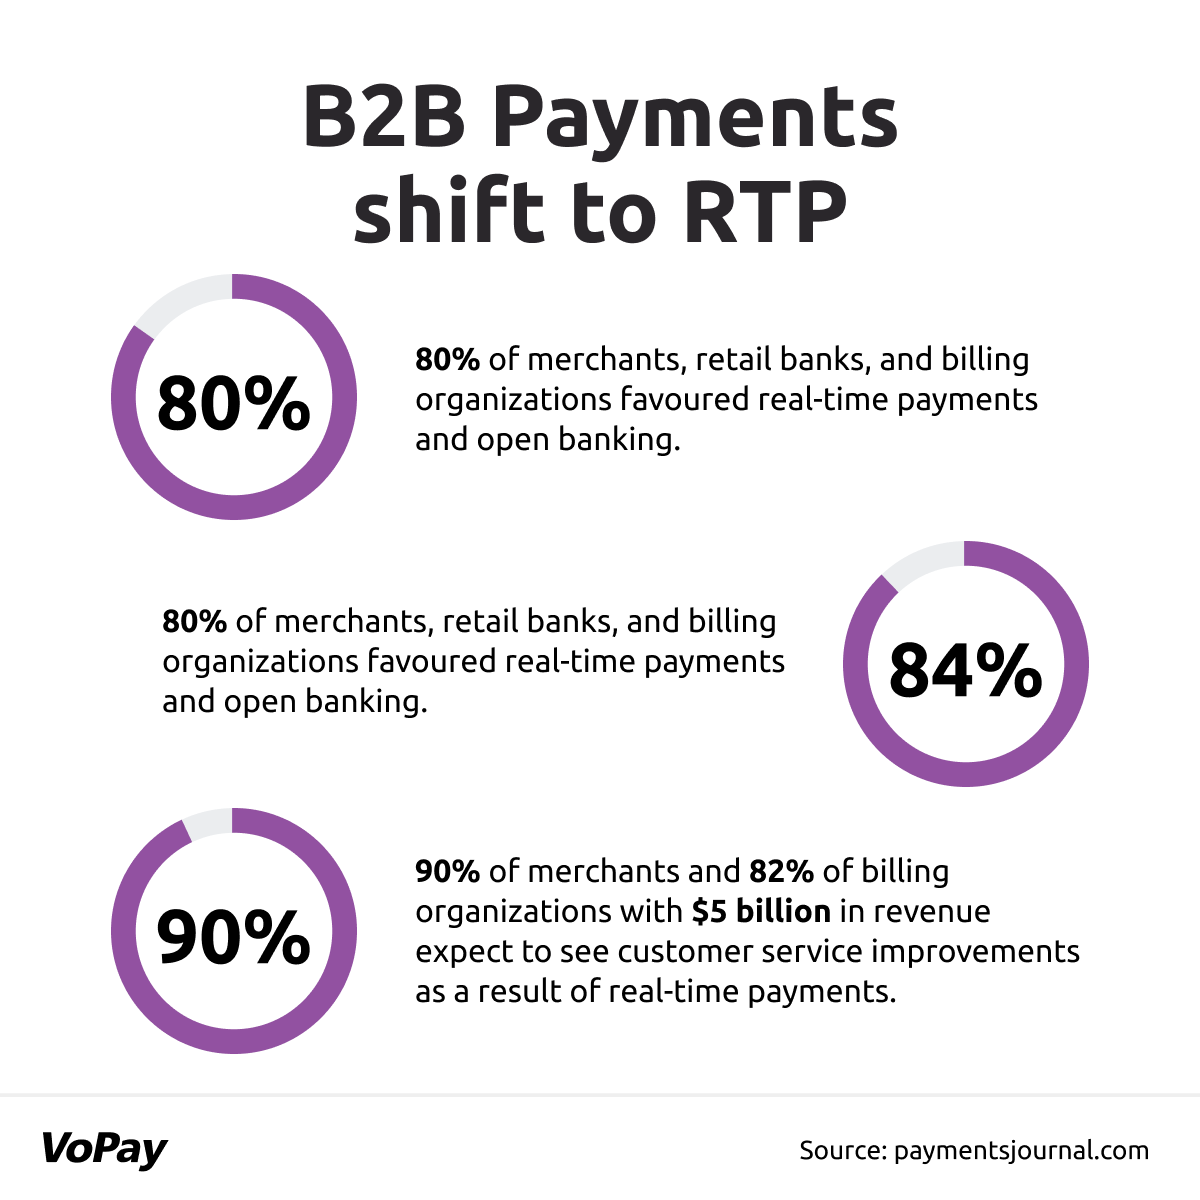 B2B Payments shift to Real-Time Payments